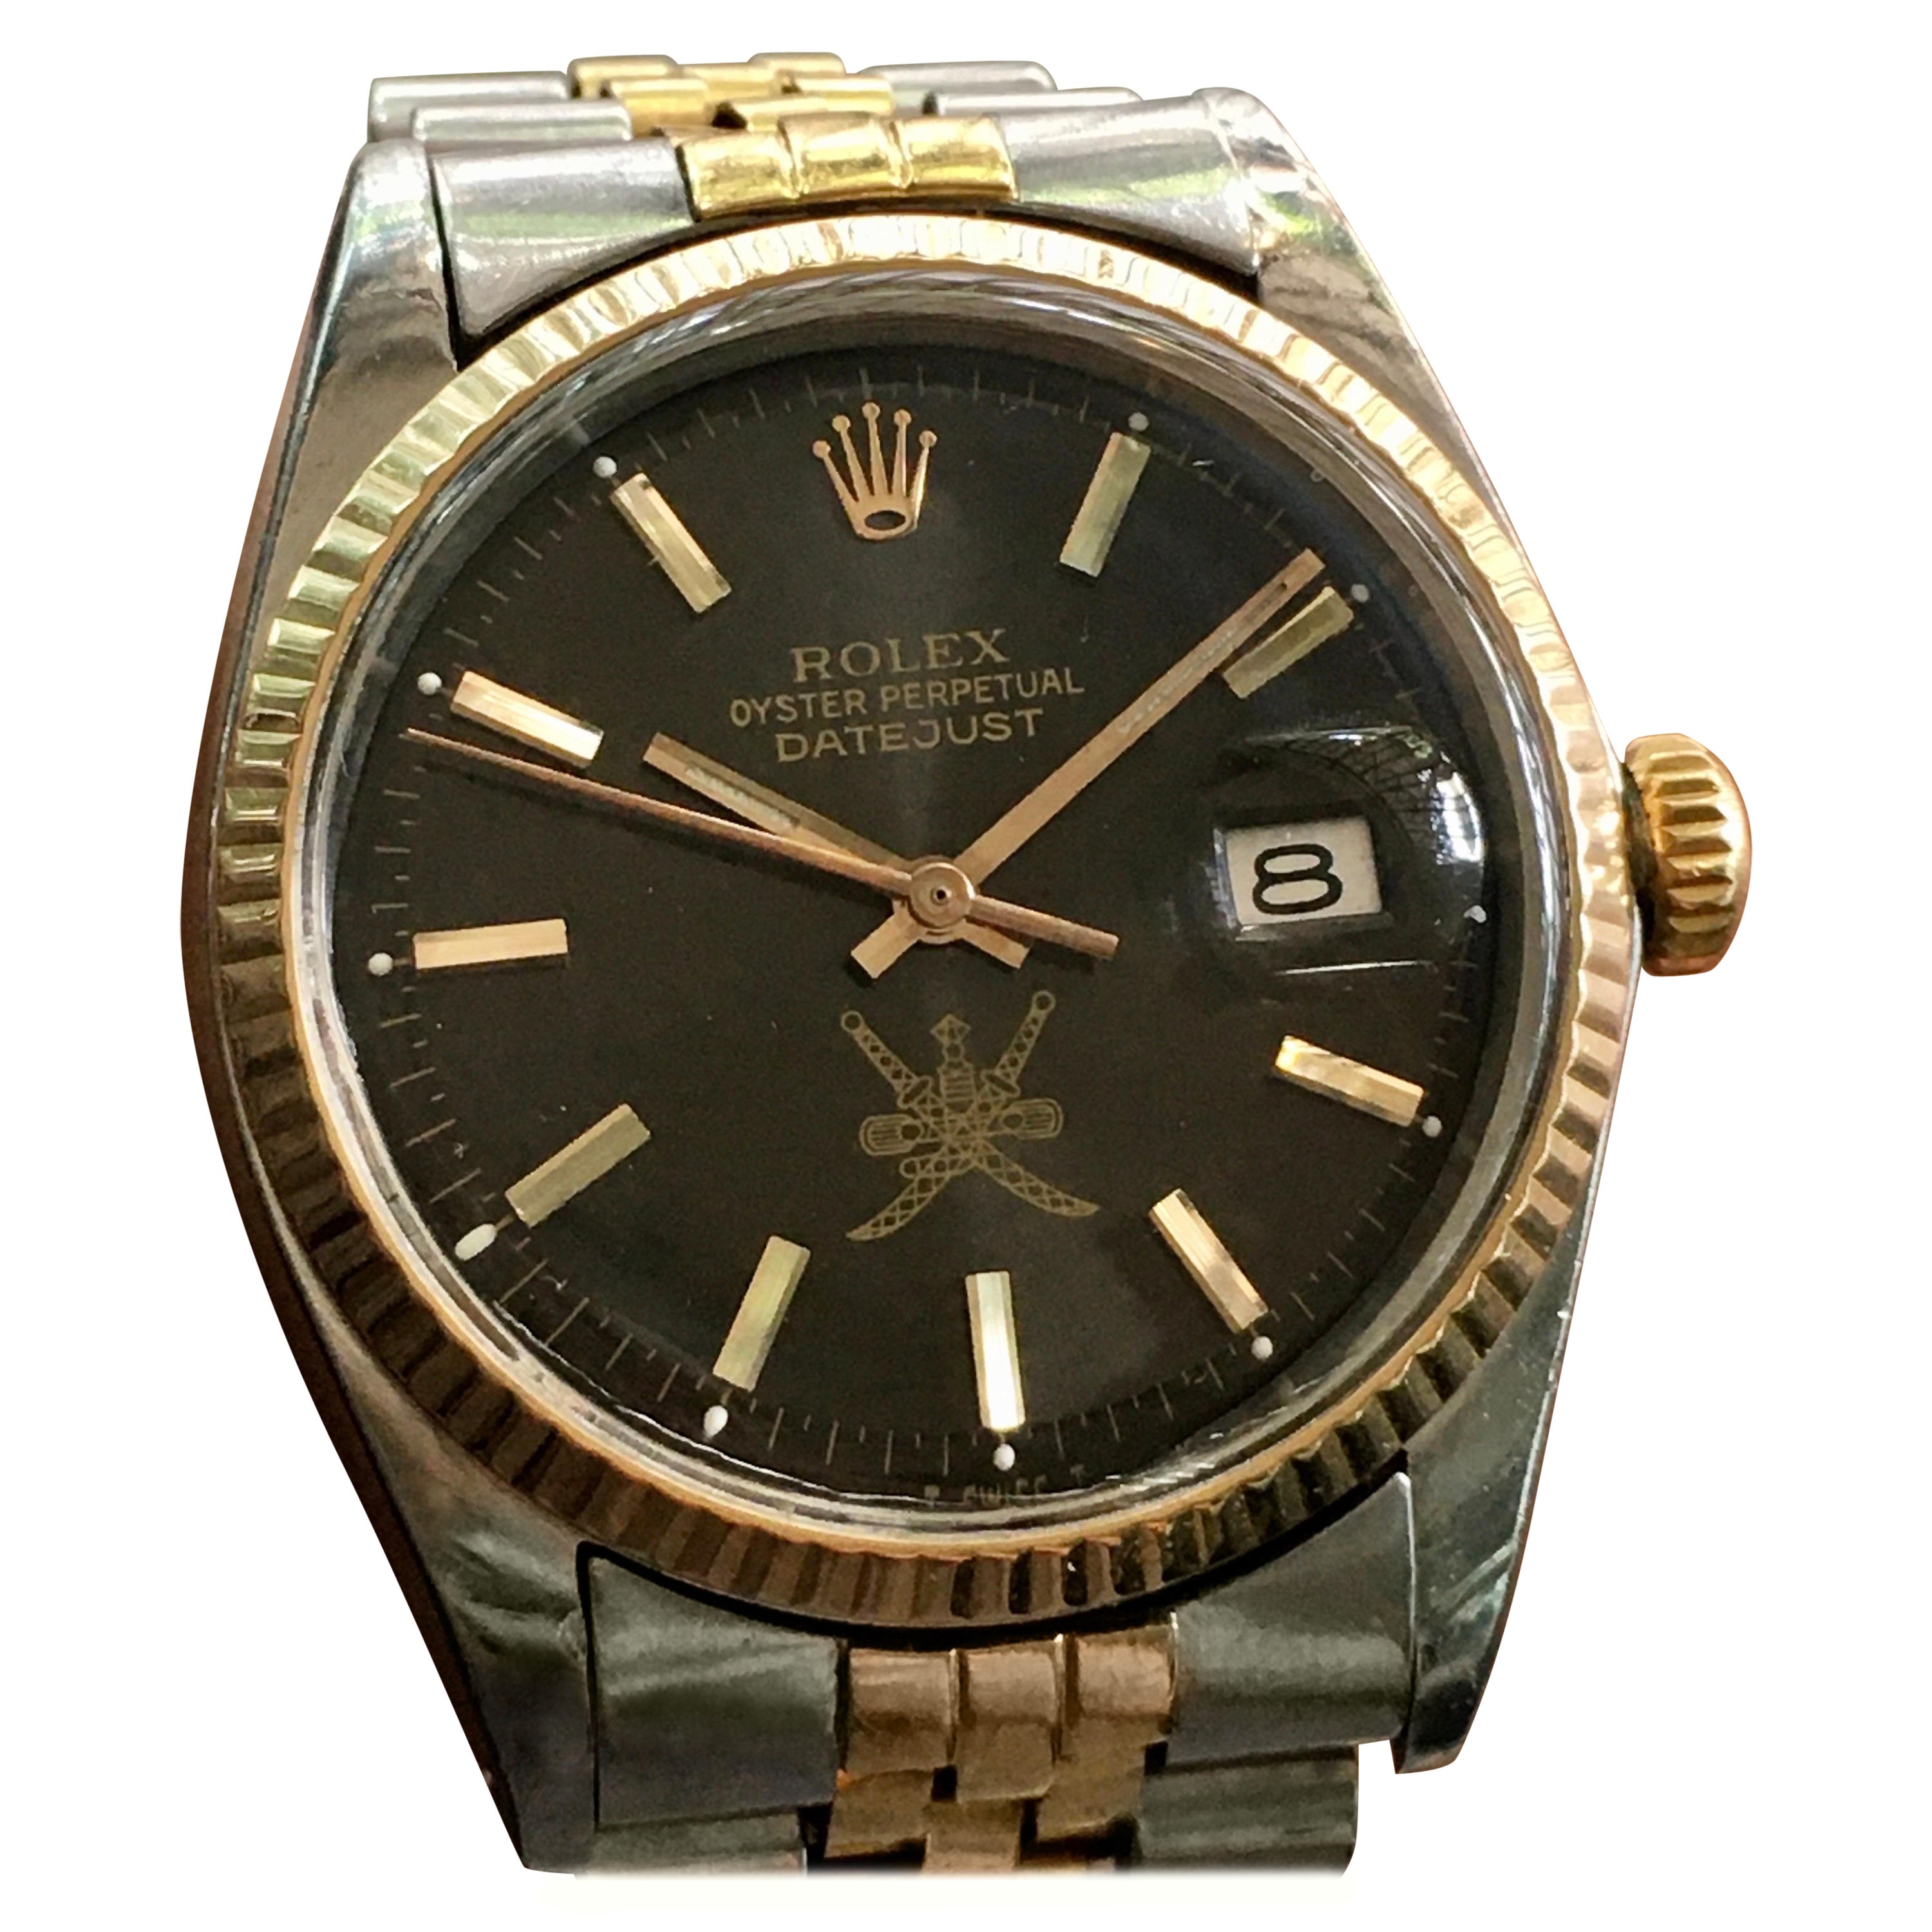 1974 Gent's Rolex Date Just Khanjar Black خنجر Dial 18K Two Tone Watch Ref 1603 For Sale